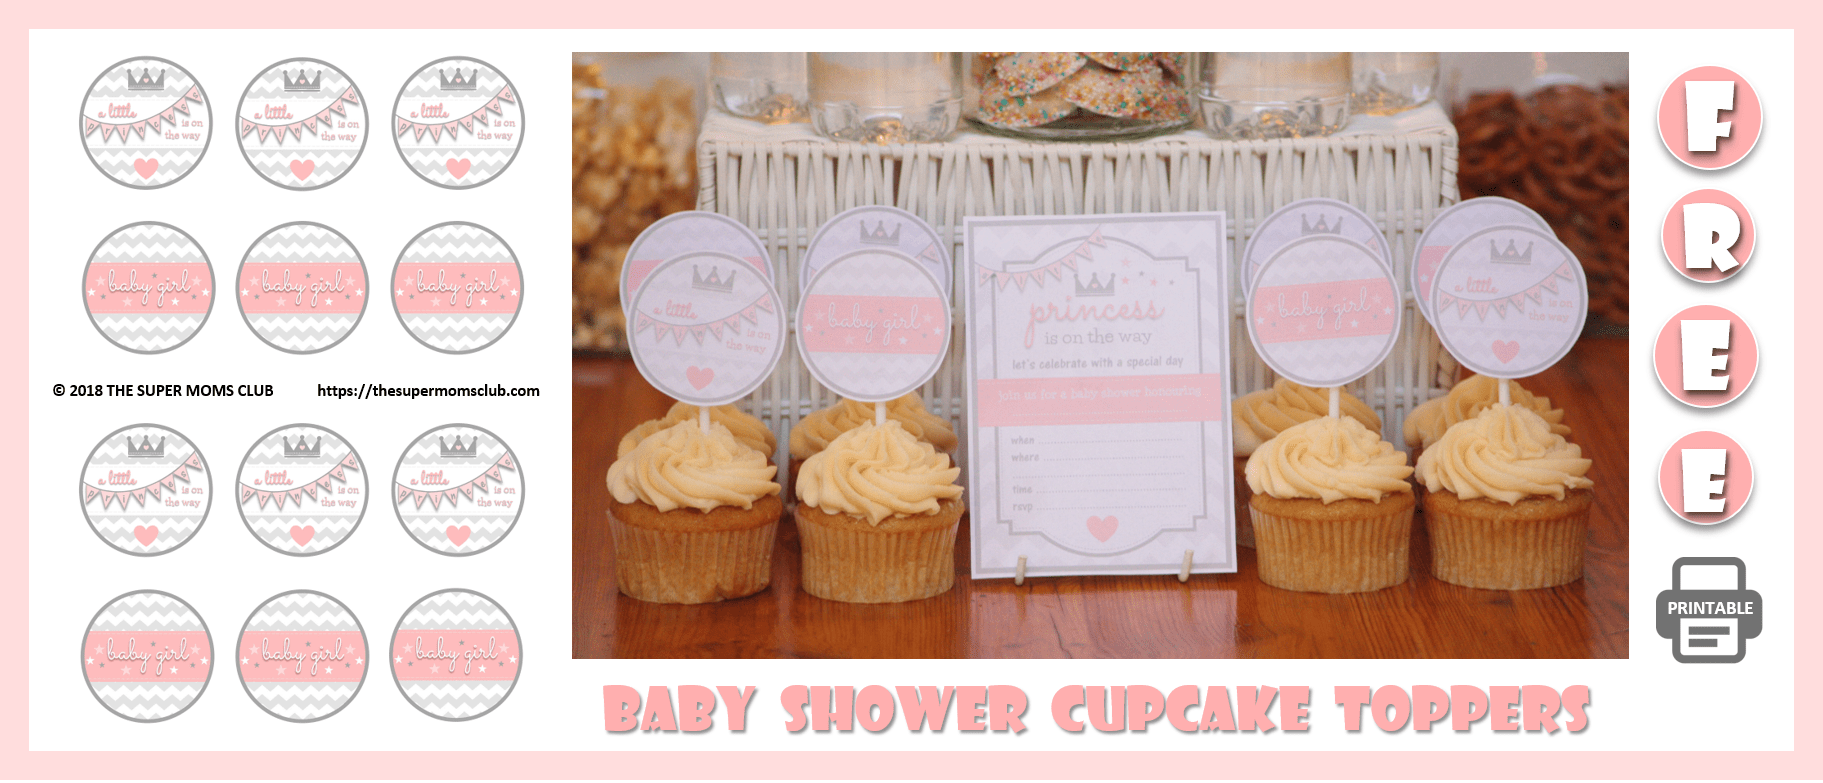 Princess Themed Baby Shower FREE PRINTABLE Cupcake Toppers - The Super Moms Club